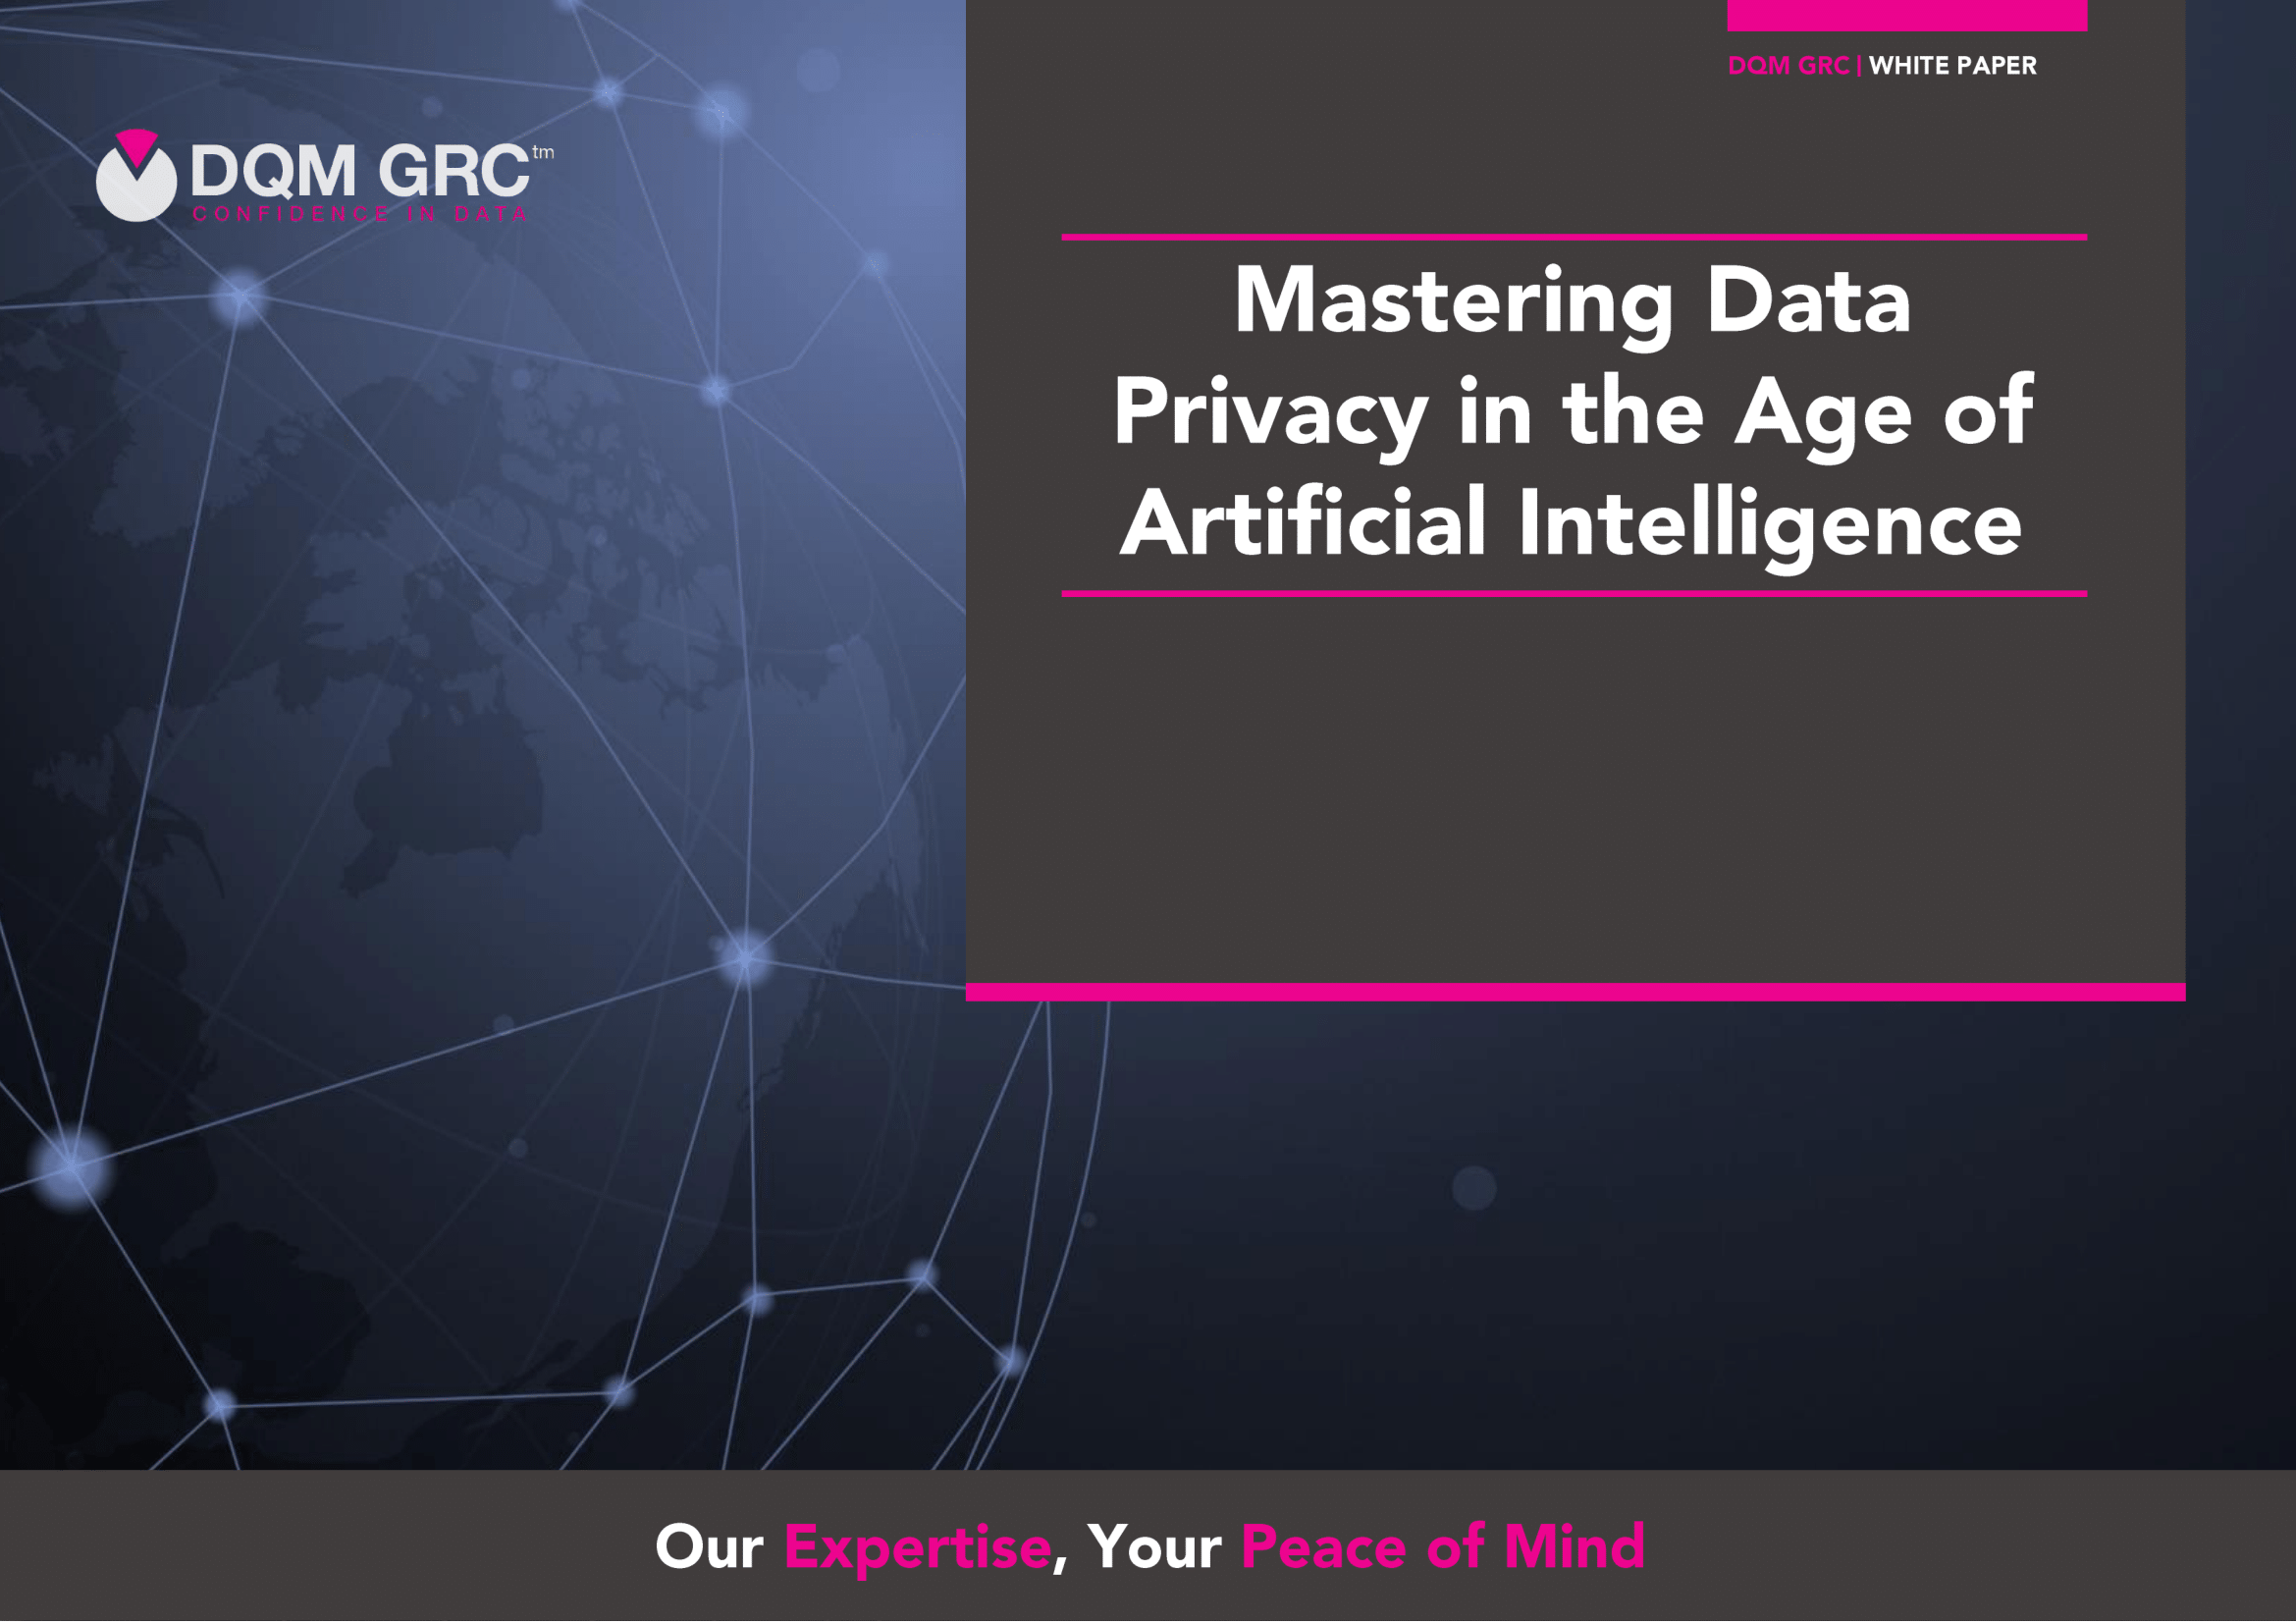 Free white paper | Mastering Data Privacy in the Age of Artificial Intelligence
